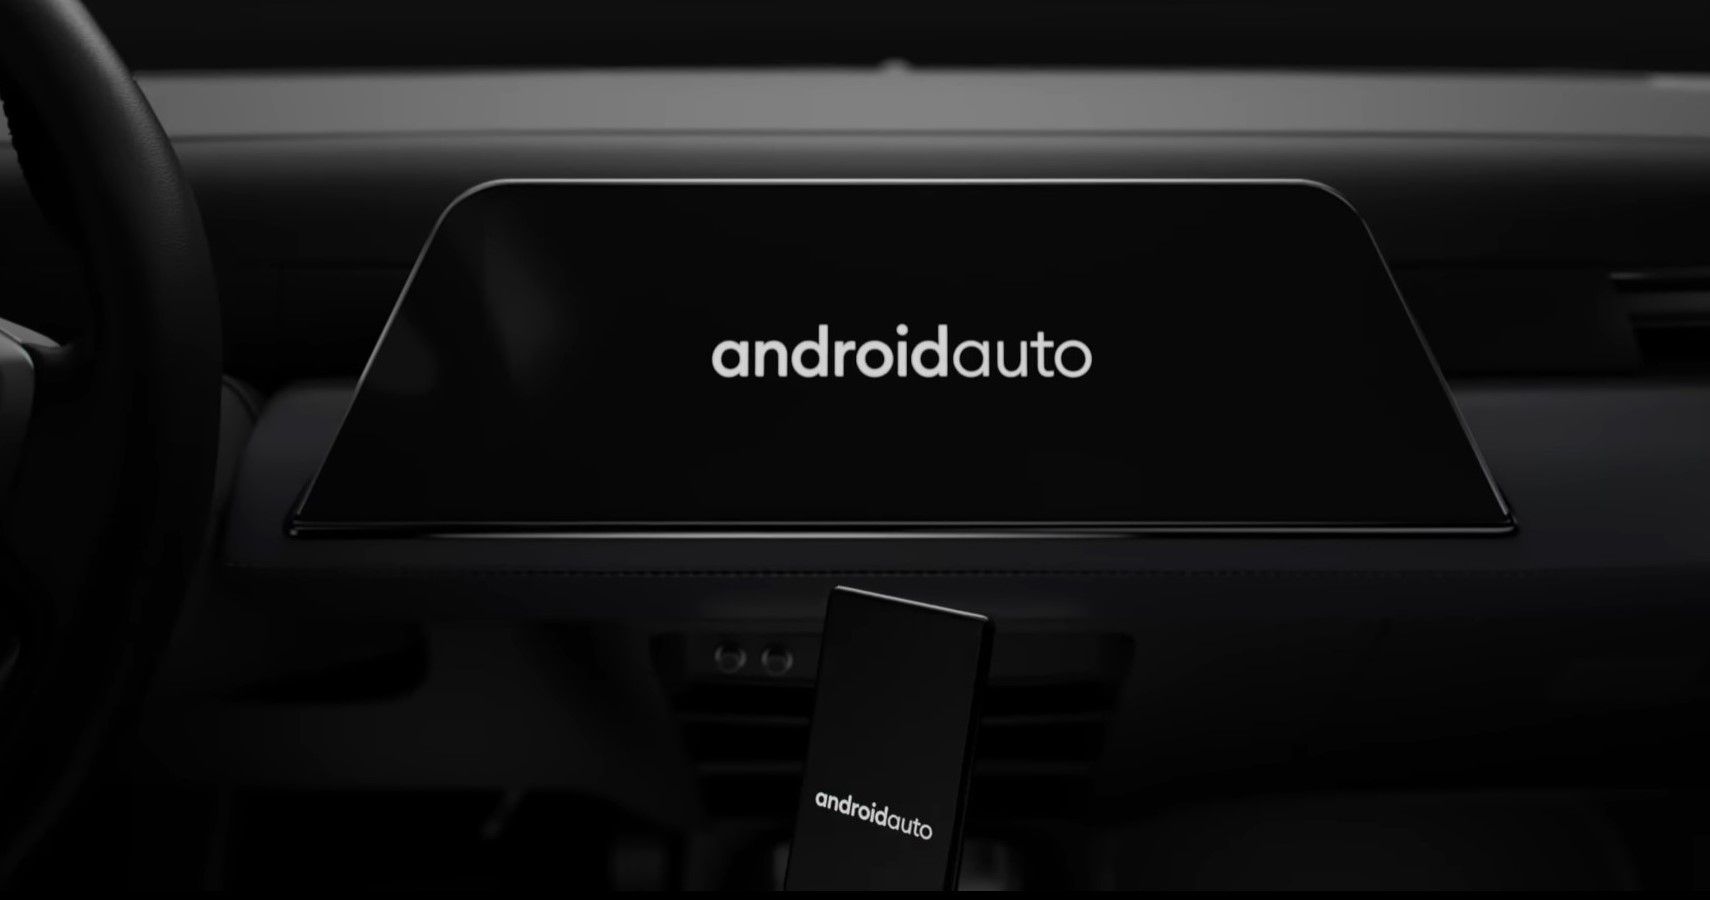 All-new Android Auto is more intuitive